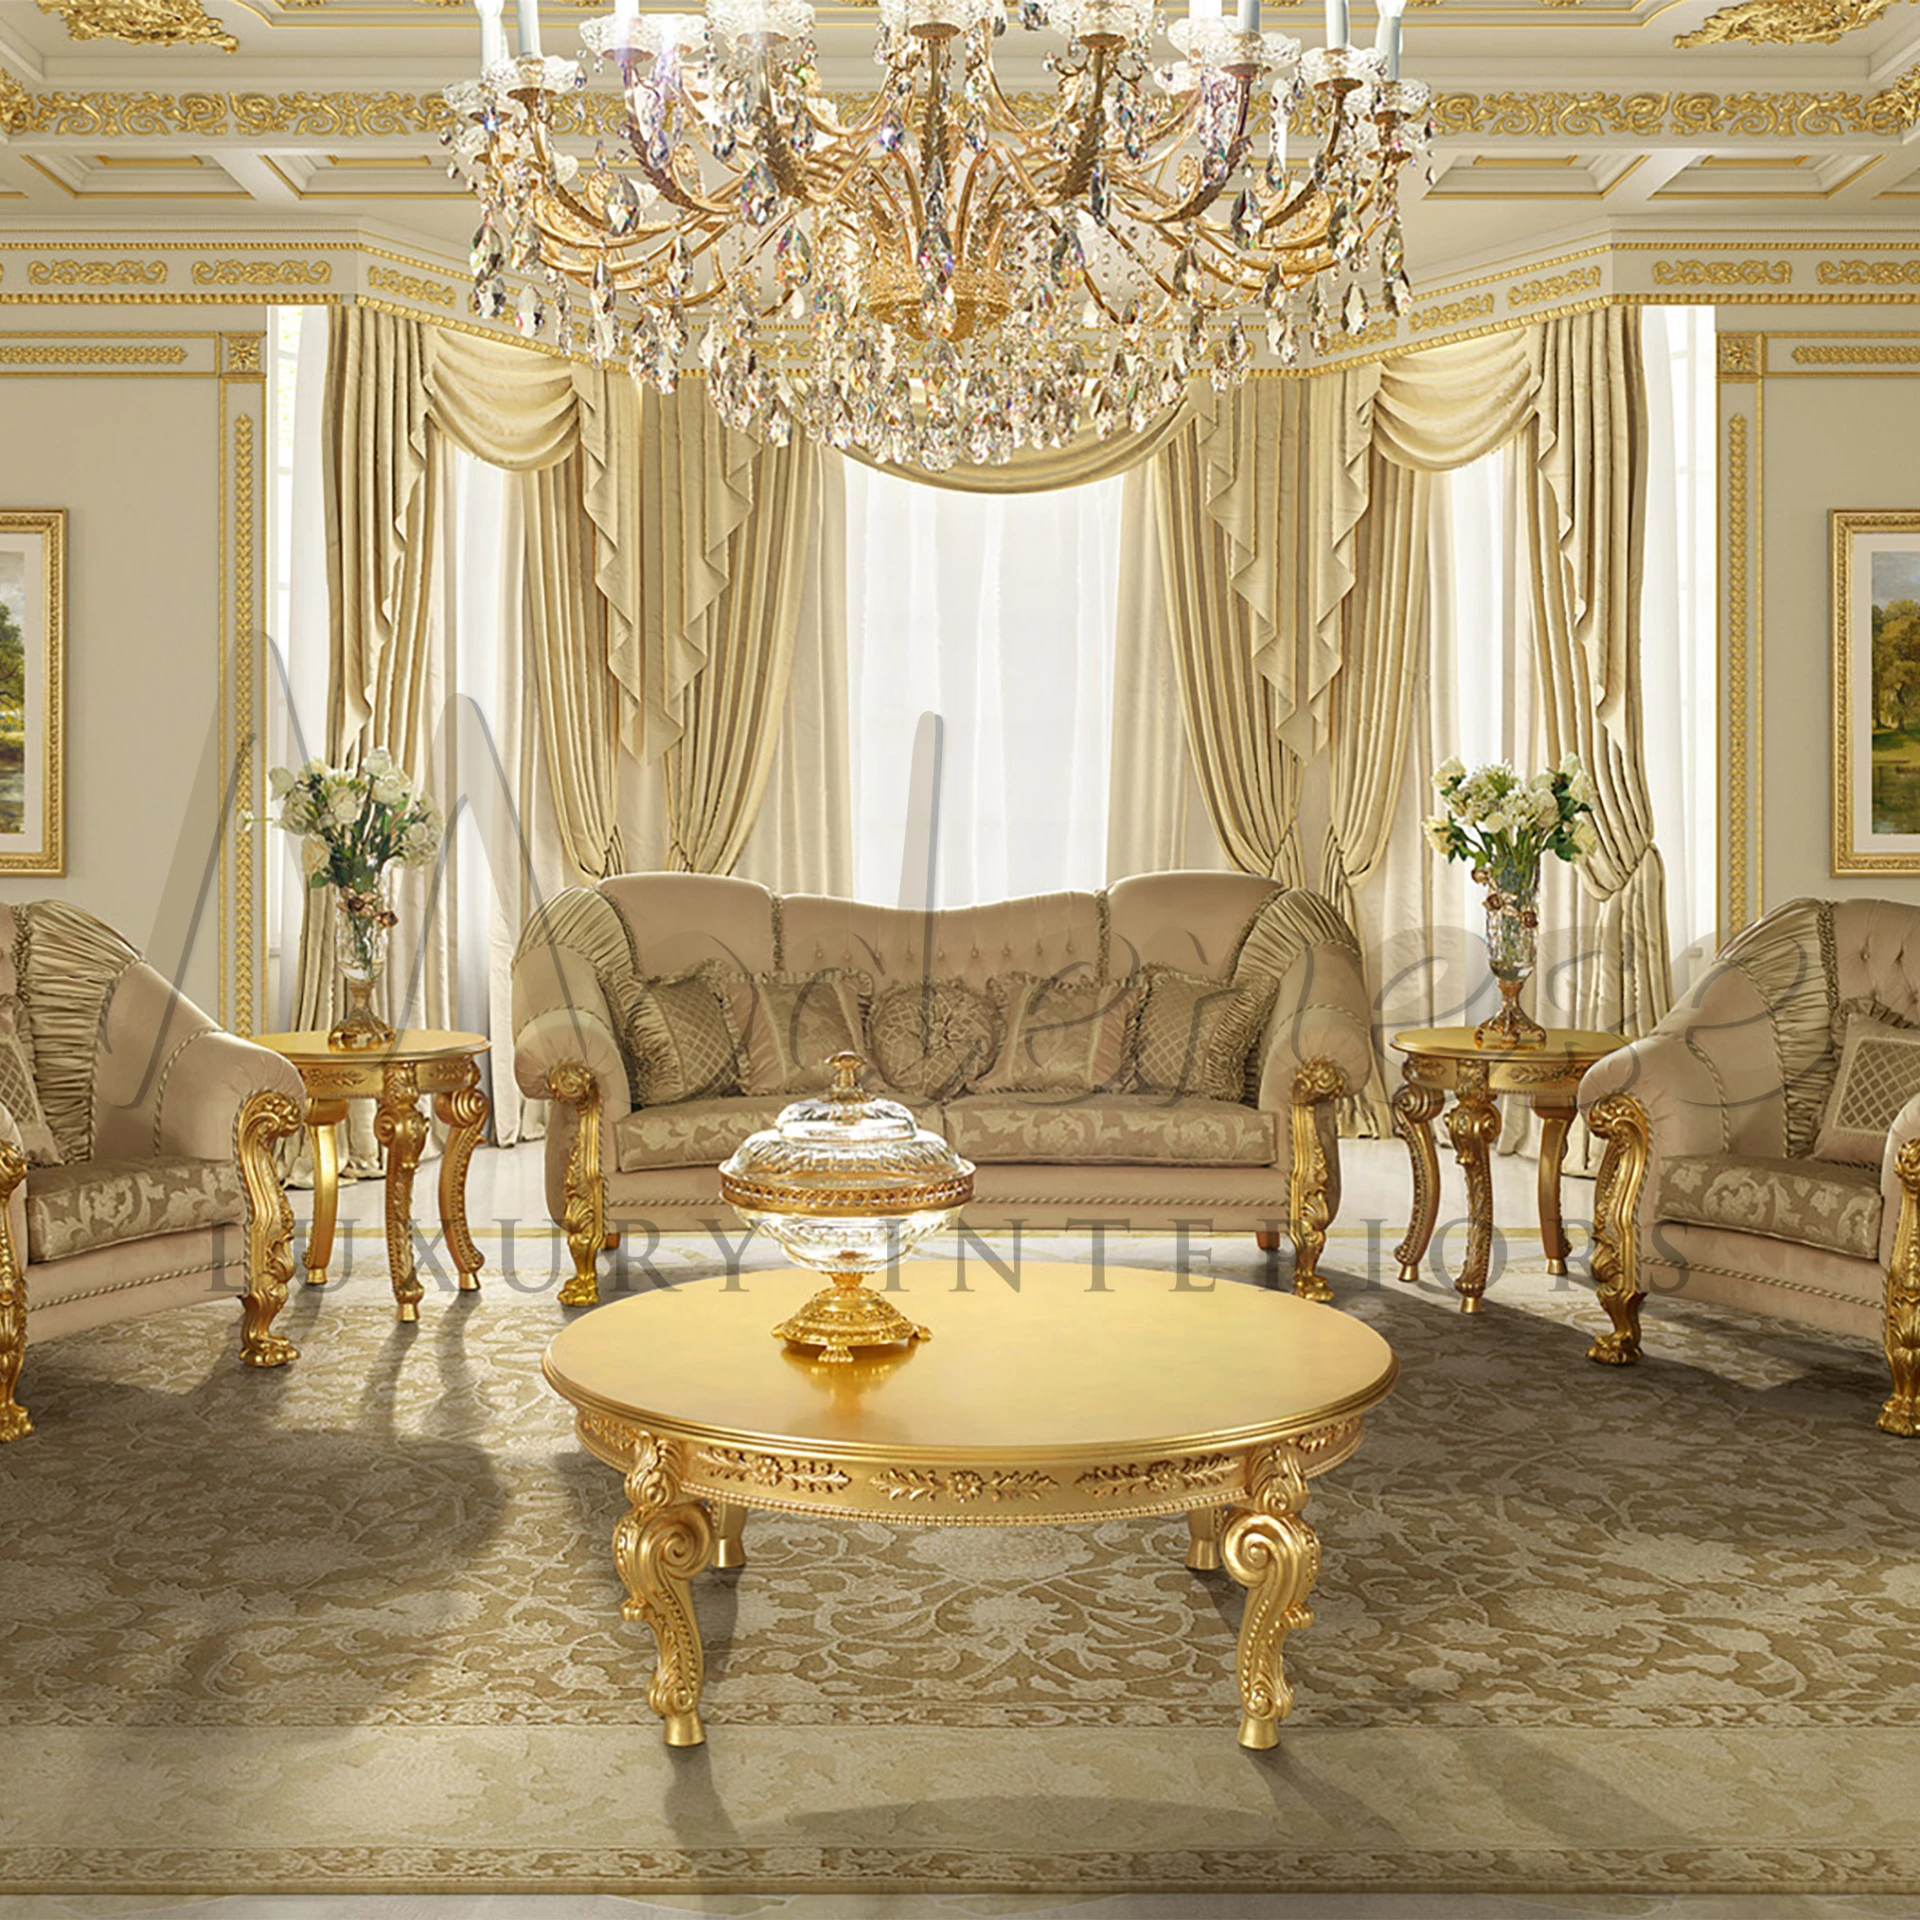 Timeless Splendor: Gilded Baroque Coffee Table - A Statement of Prestige